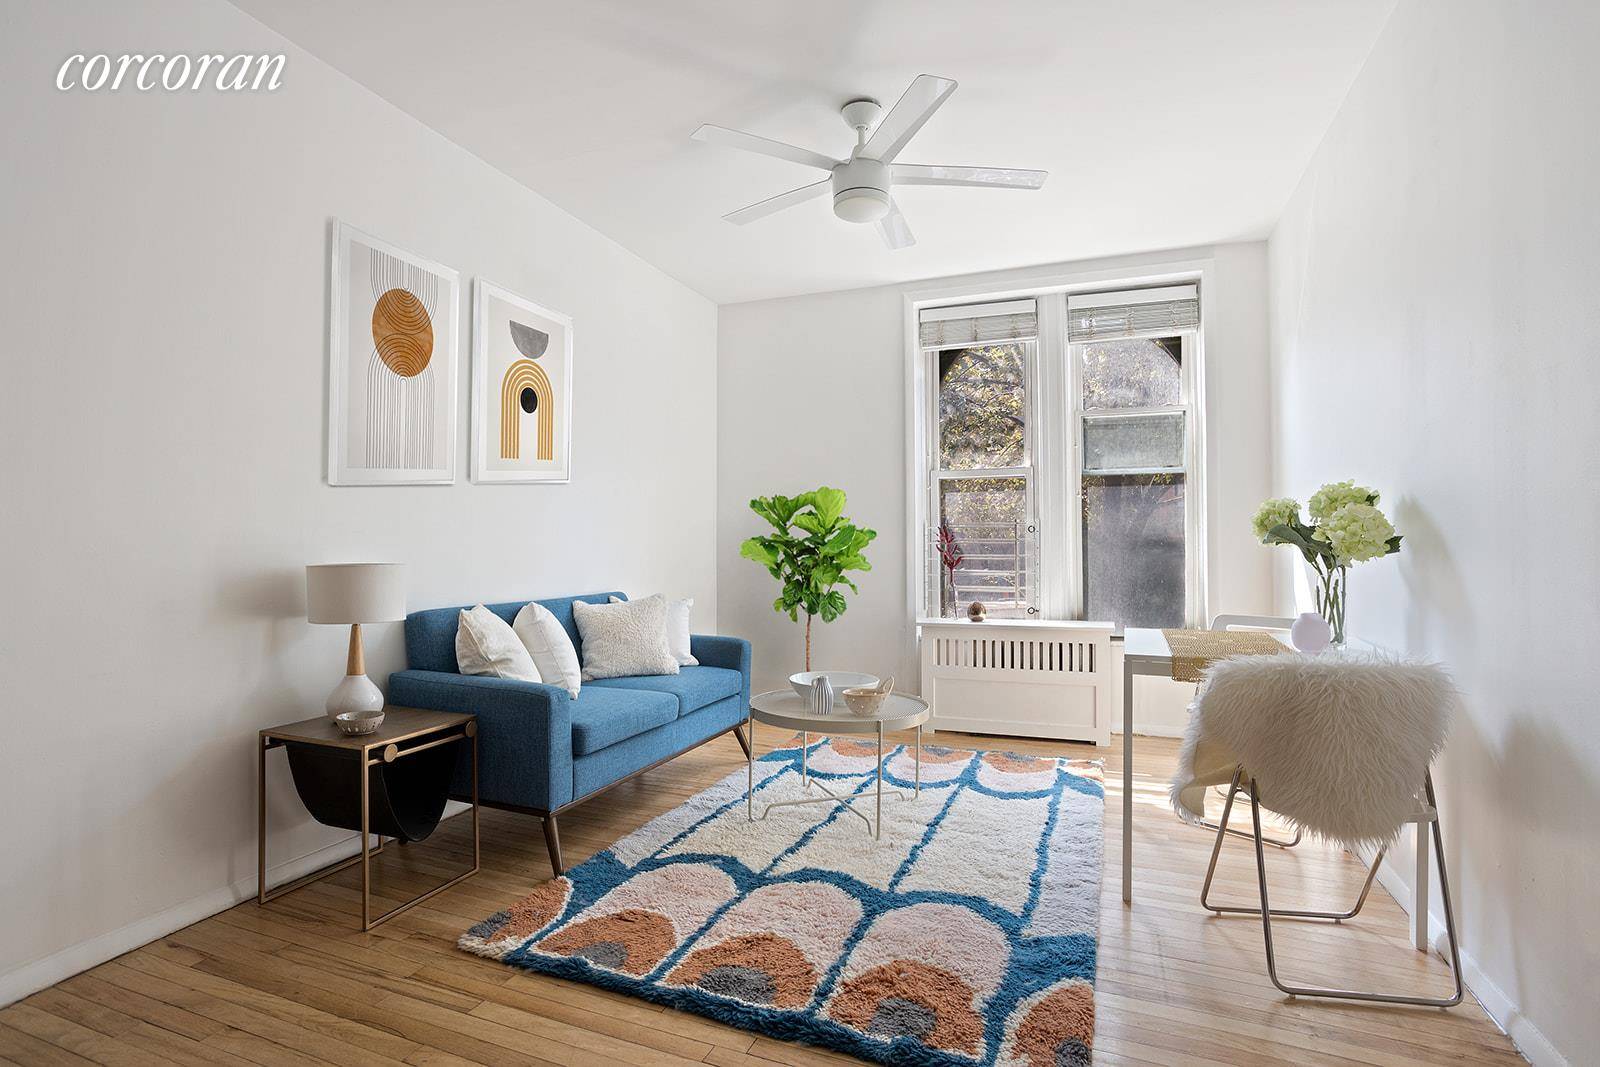 SHOWING BY PRIVATE APPOINTMENT ONLY NO OPEN HOUSES Bright amp ; Spacious in Park Slope Let the sun shine into this charming two bedroom coop with two full bathrooms !